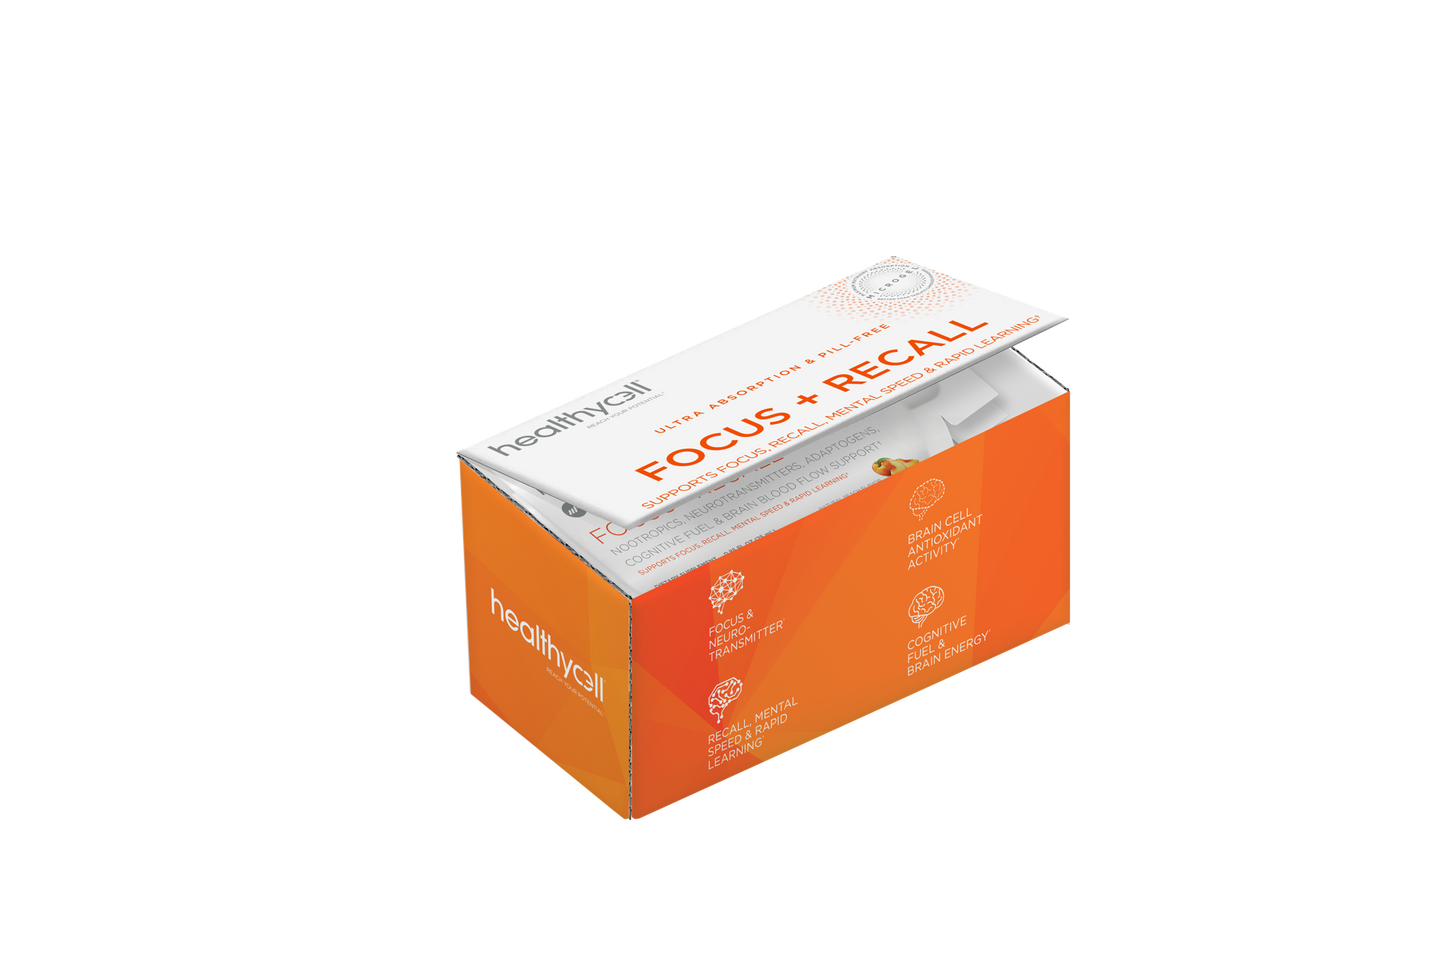 Focus + Recall (7-Serv) by Healthycell